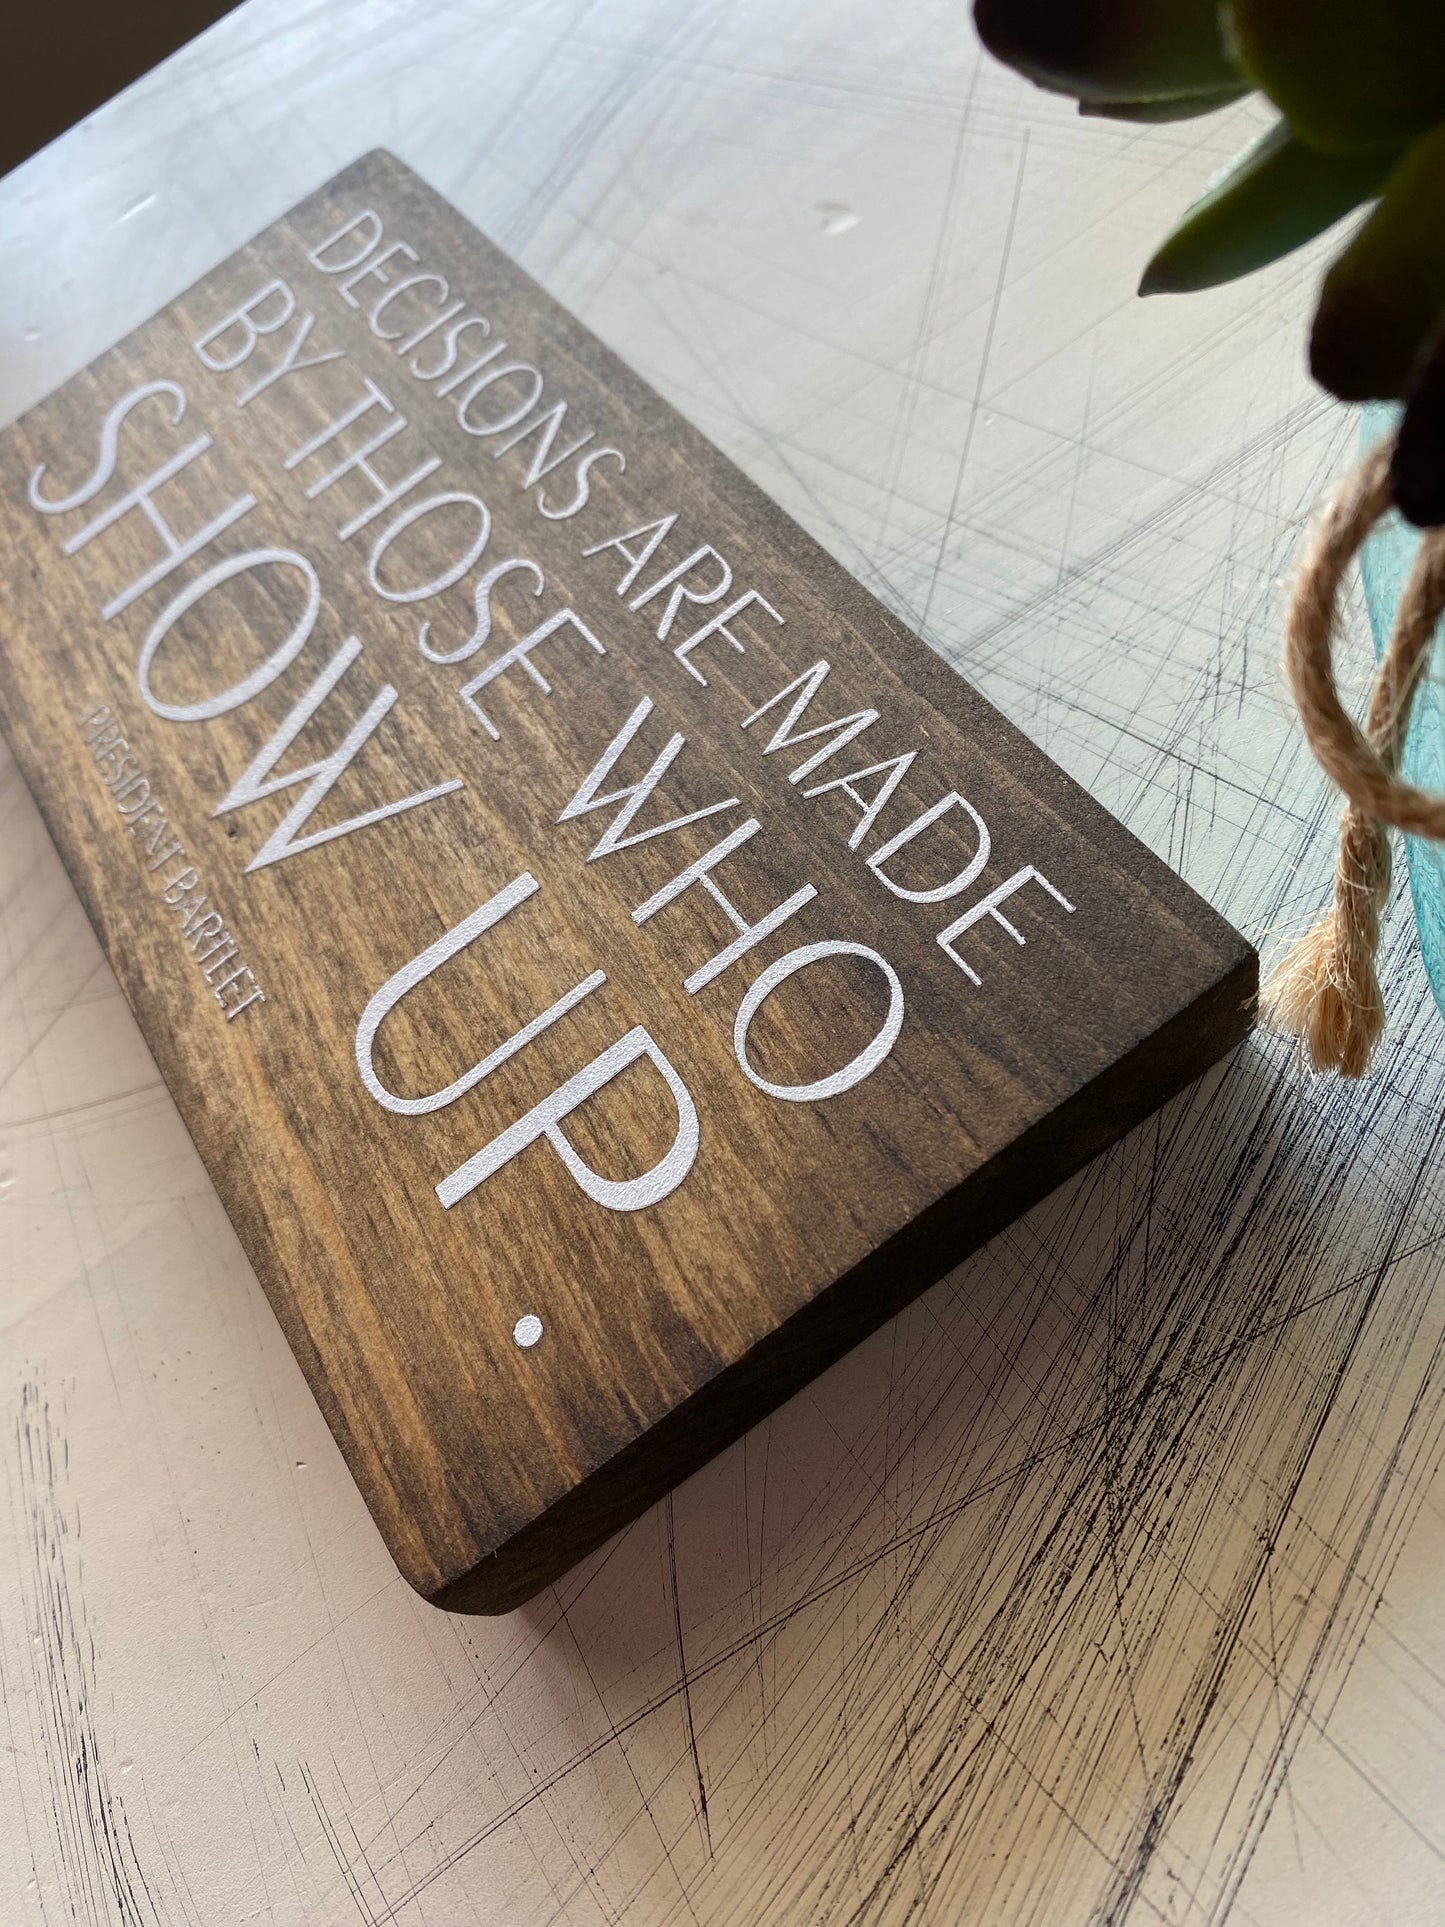 Decisions are made by those who show up. -President Bartlet, mini wood sign